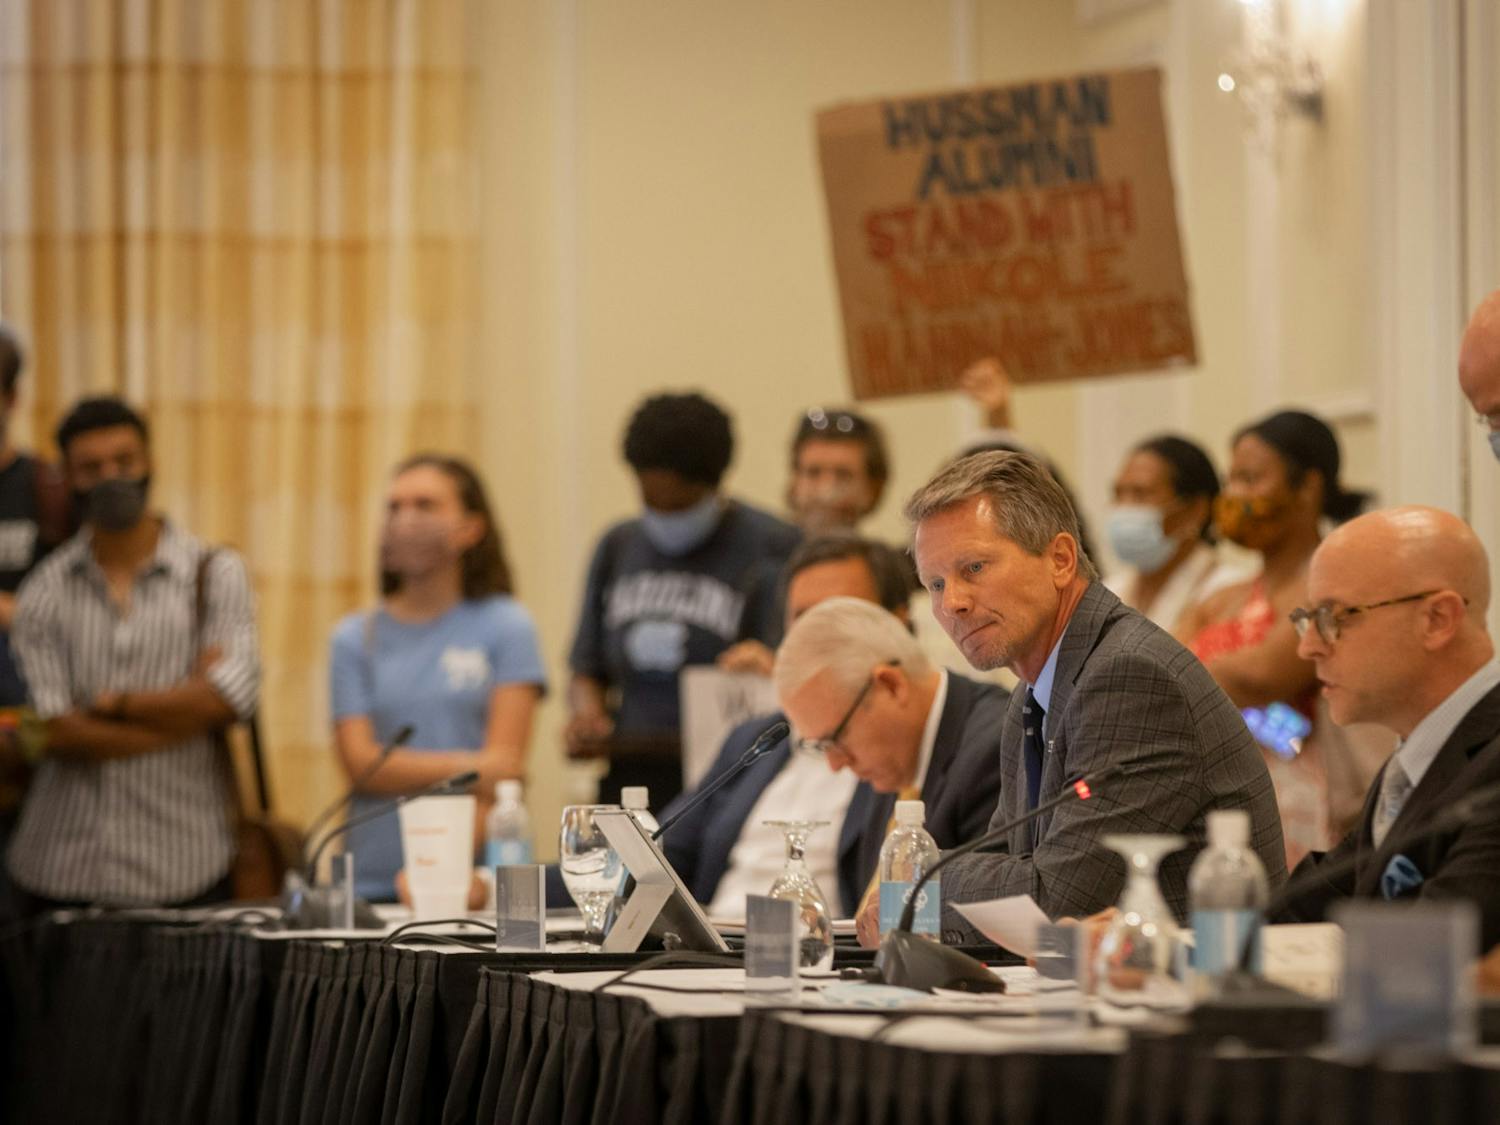 UNC Chancellor Kevin Guskiewicz as pictured after the June 30 Board of Trustees meeting where the Board voted to grant tenure to Nikole Hannah-Jones.